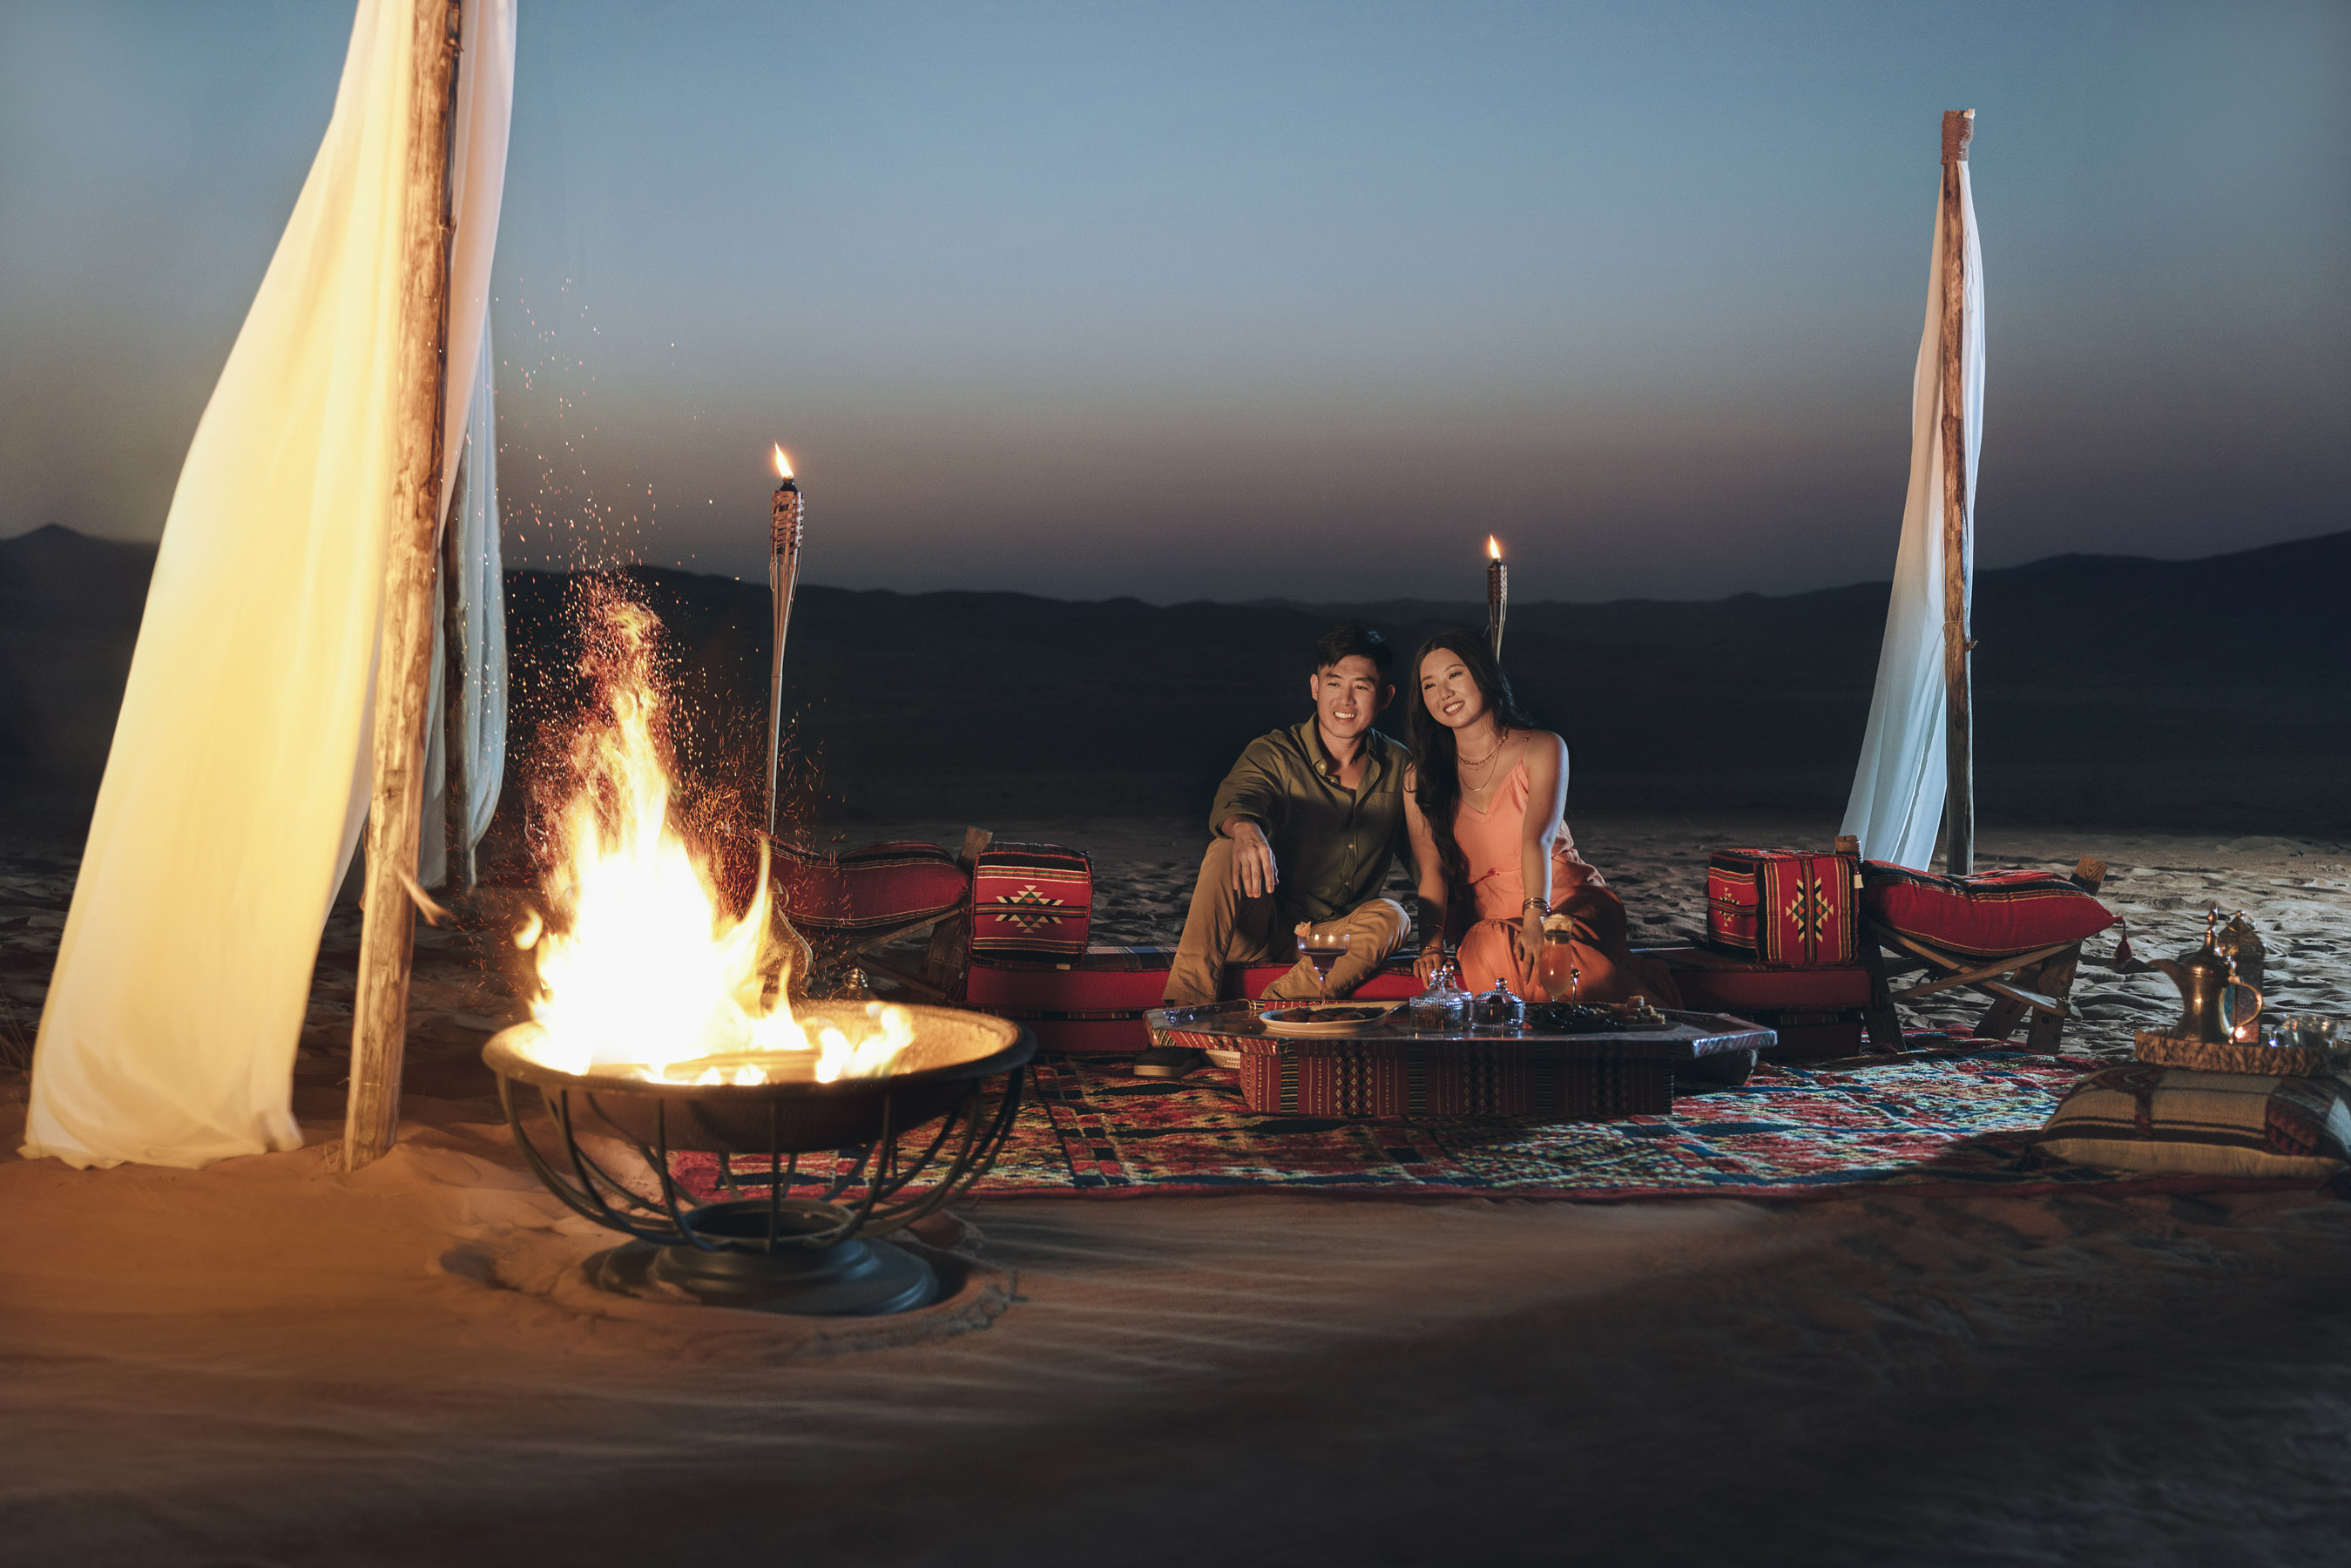 Liwa Nights provides a wondrous experience for adventurous and curious travellers